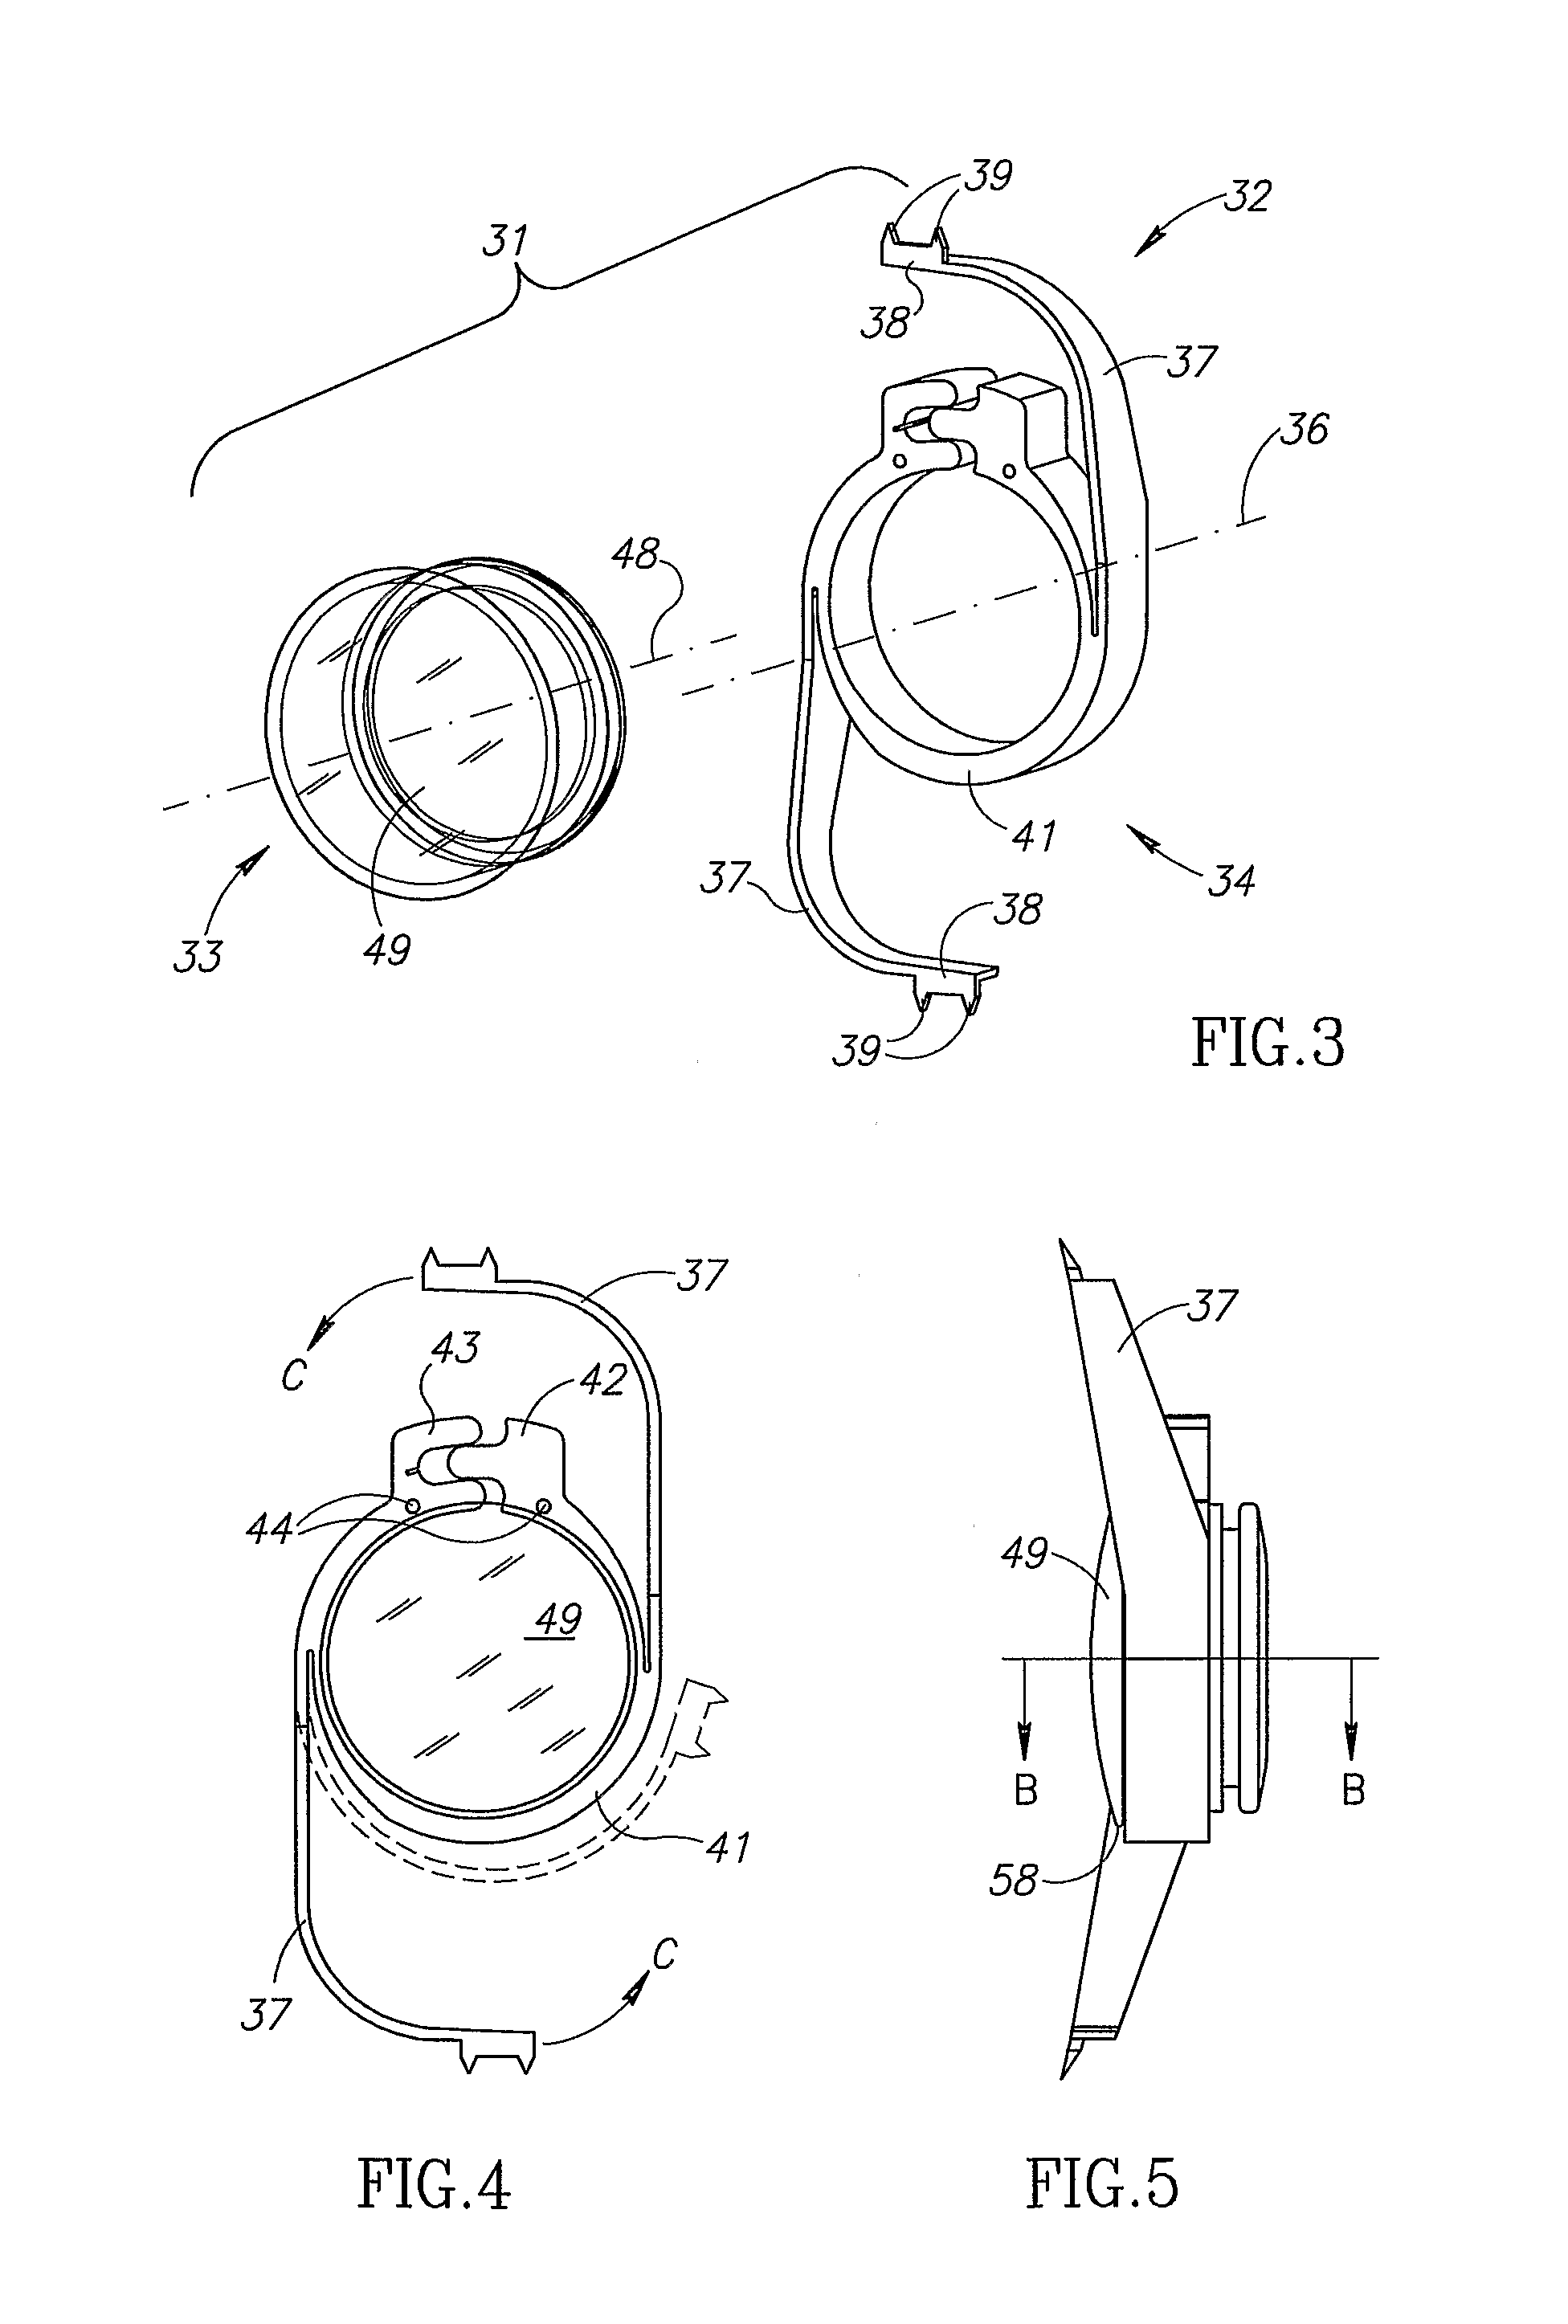 Accommodating Intraocular Lens Assemblies and Accommodation Measurement Implant